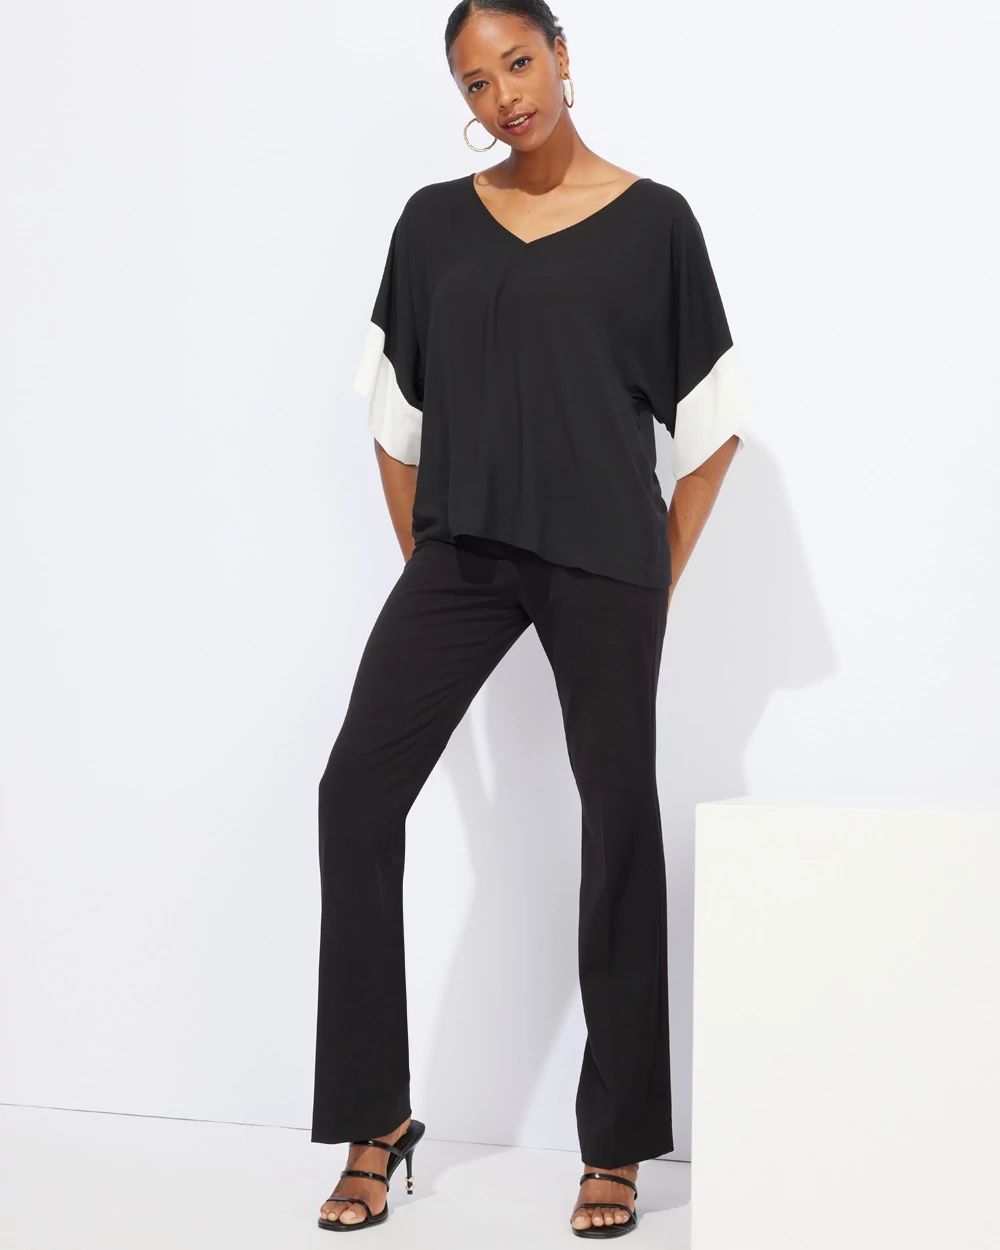 Outlet WHBM Colorblock Kimono Top click to view larger image.